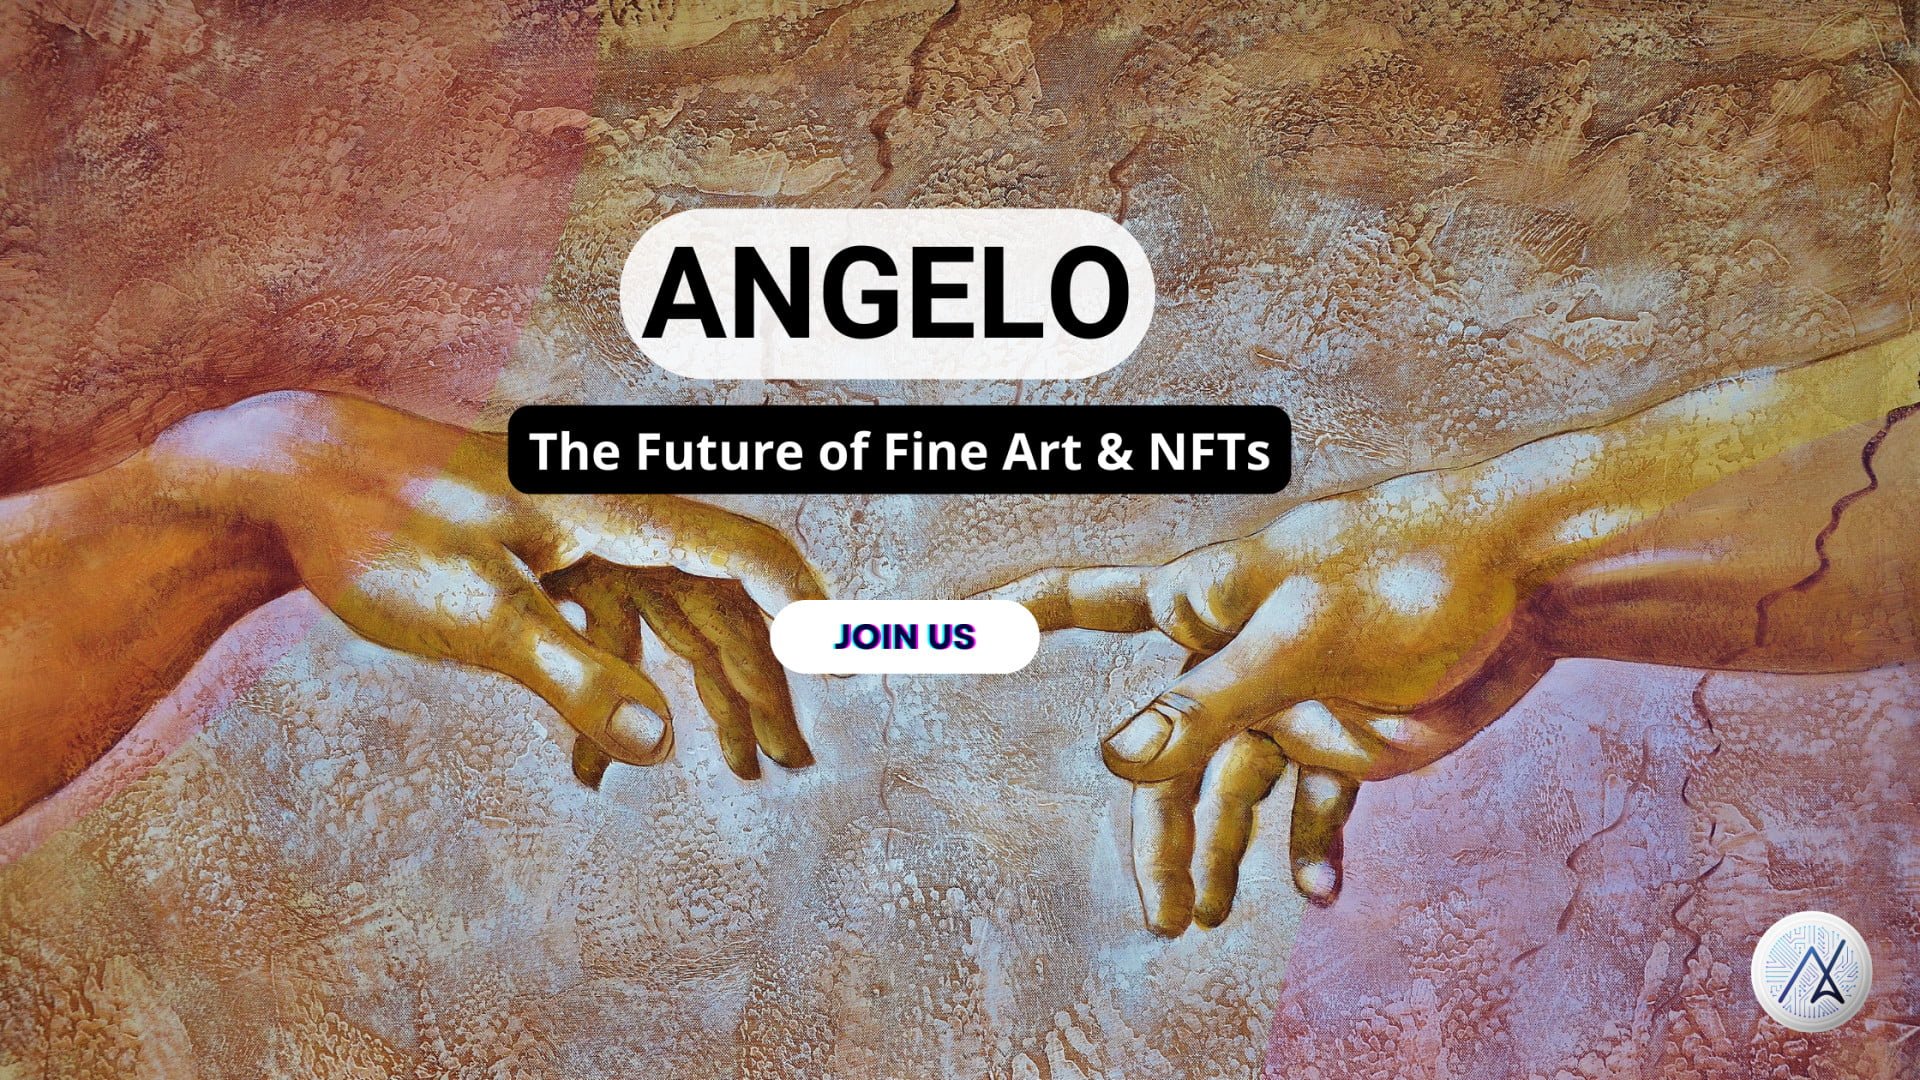 Web3 Platform Angelo Prepares to Reimagine Physical Art Collection 4